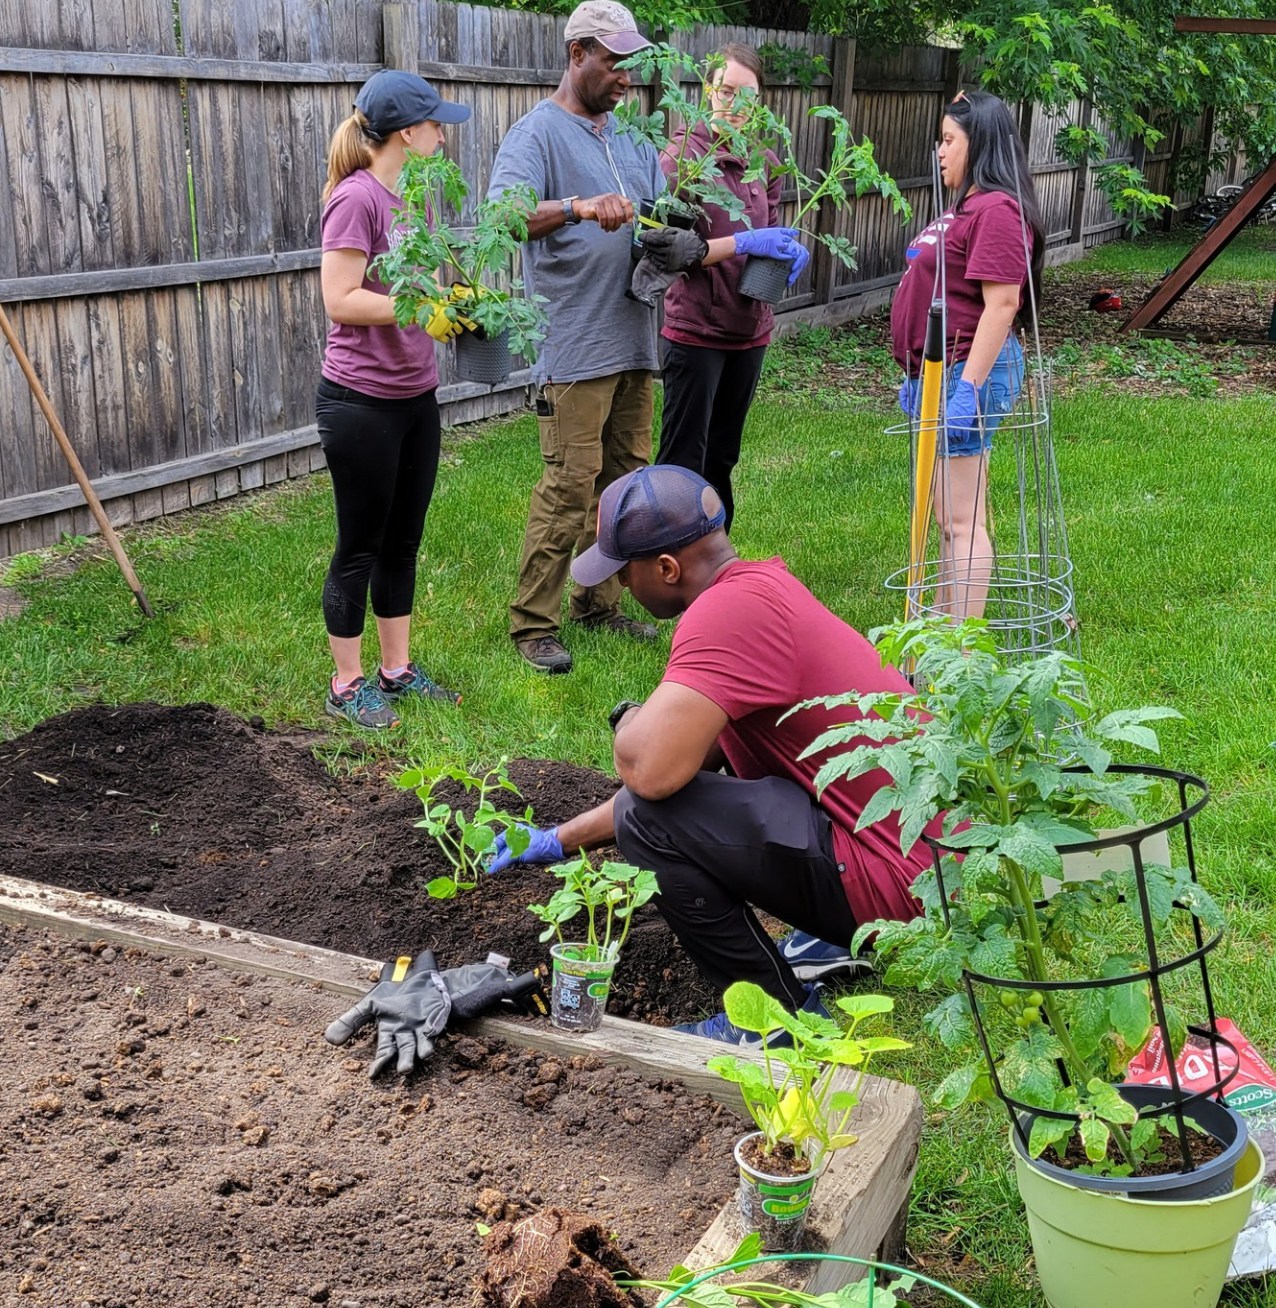 Looking for a way to volunteer in Minnesota while spending time outside? Cornerstone is currently looking for volunteers to help with outdoor maintenance, gardening and weeding. Cornerstone was founded in 1983 to connect women in crisis due to domestic violence with support and safety. Since then, we’ve become a multifaceted nonprofit with accessible, innovative and comprehensive services for adults and youth of all genders who are experiencing or have experienced domestic violence, sexual violence, human trafficking or crime.To learn more about how you can support this incredible non-profit, check out their volunteer page:  https://loom.ly/9muRQAs #MNUpstream #Upstream #goupstream #domesticviolence #minnesota #volunteer #gardening #support #nonprofit — from Instagram